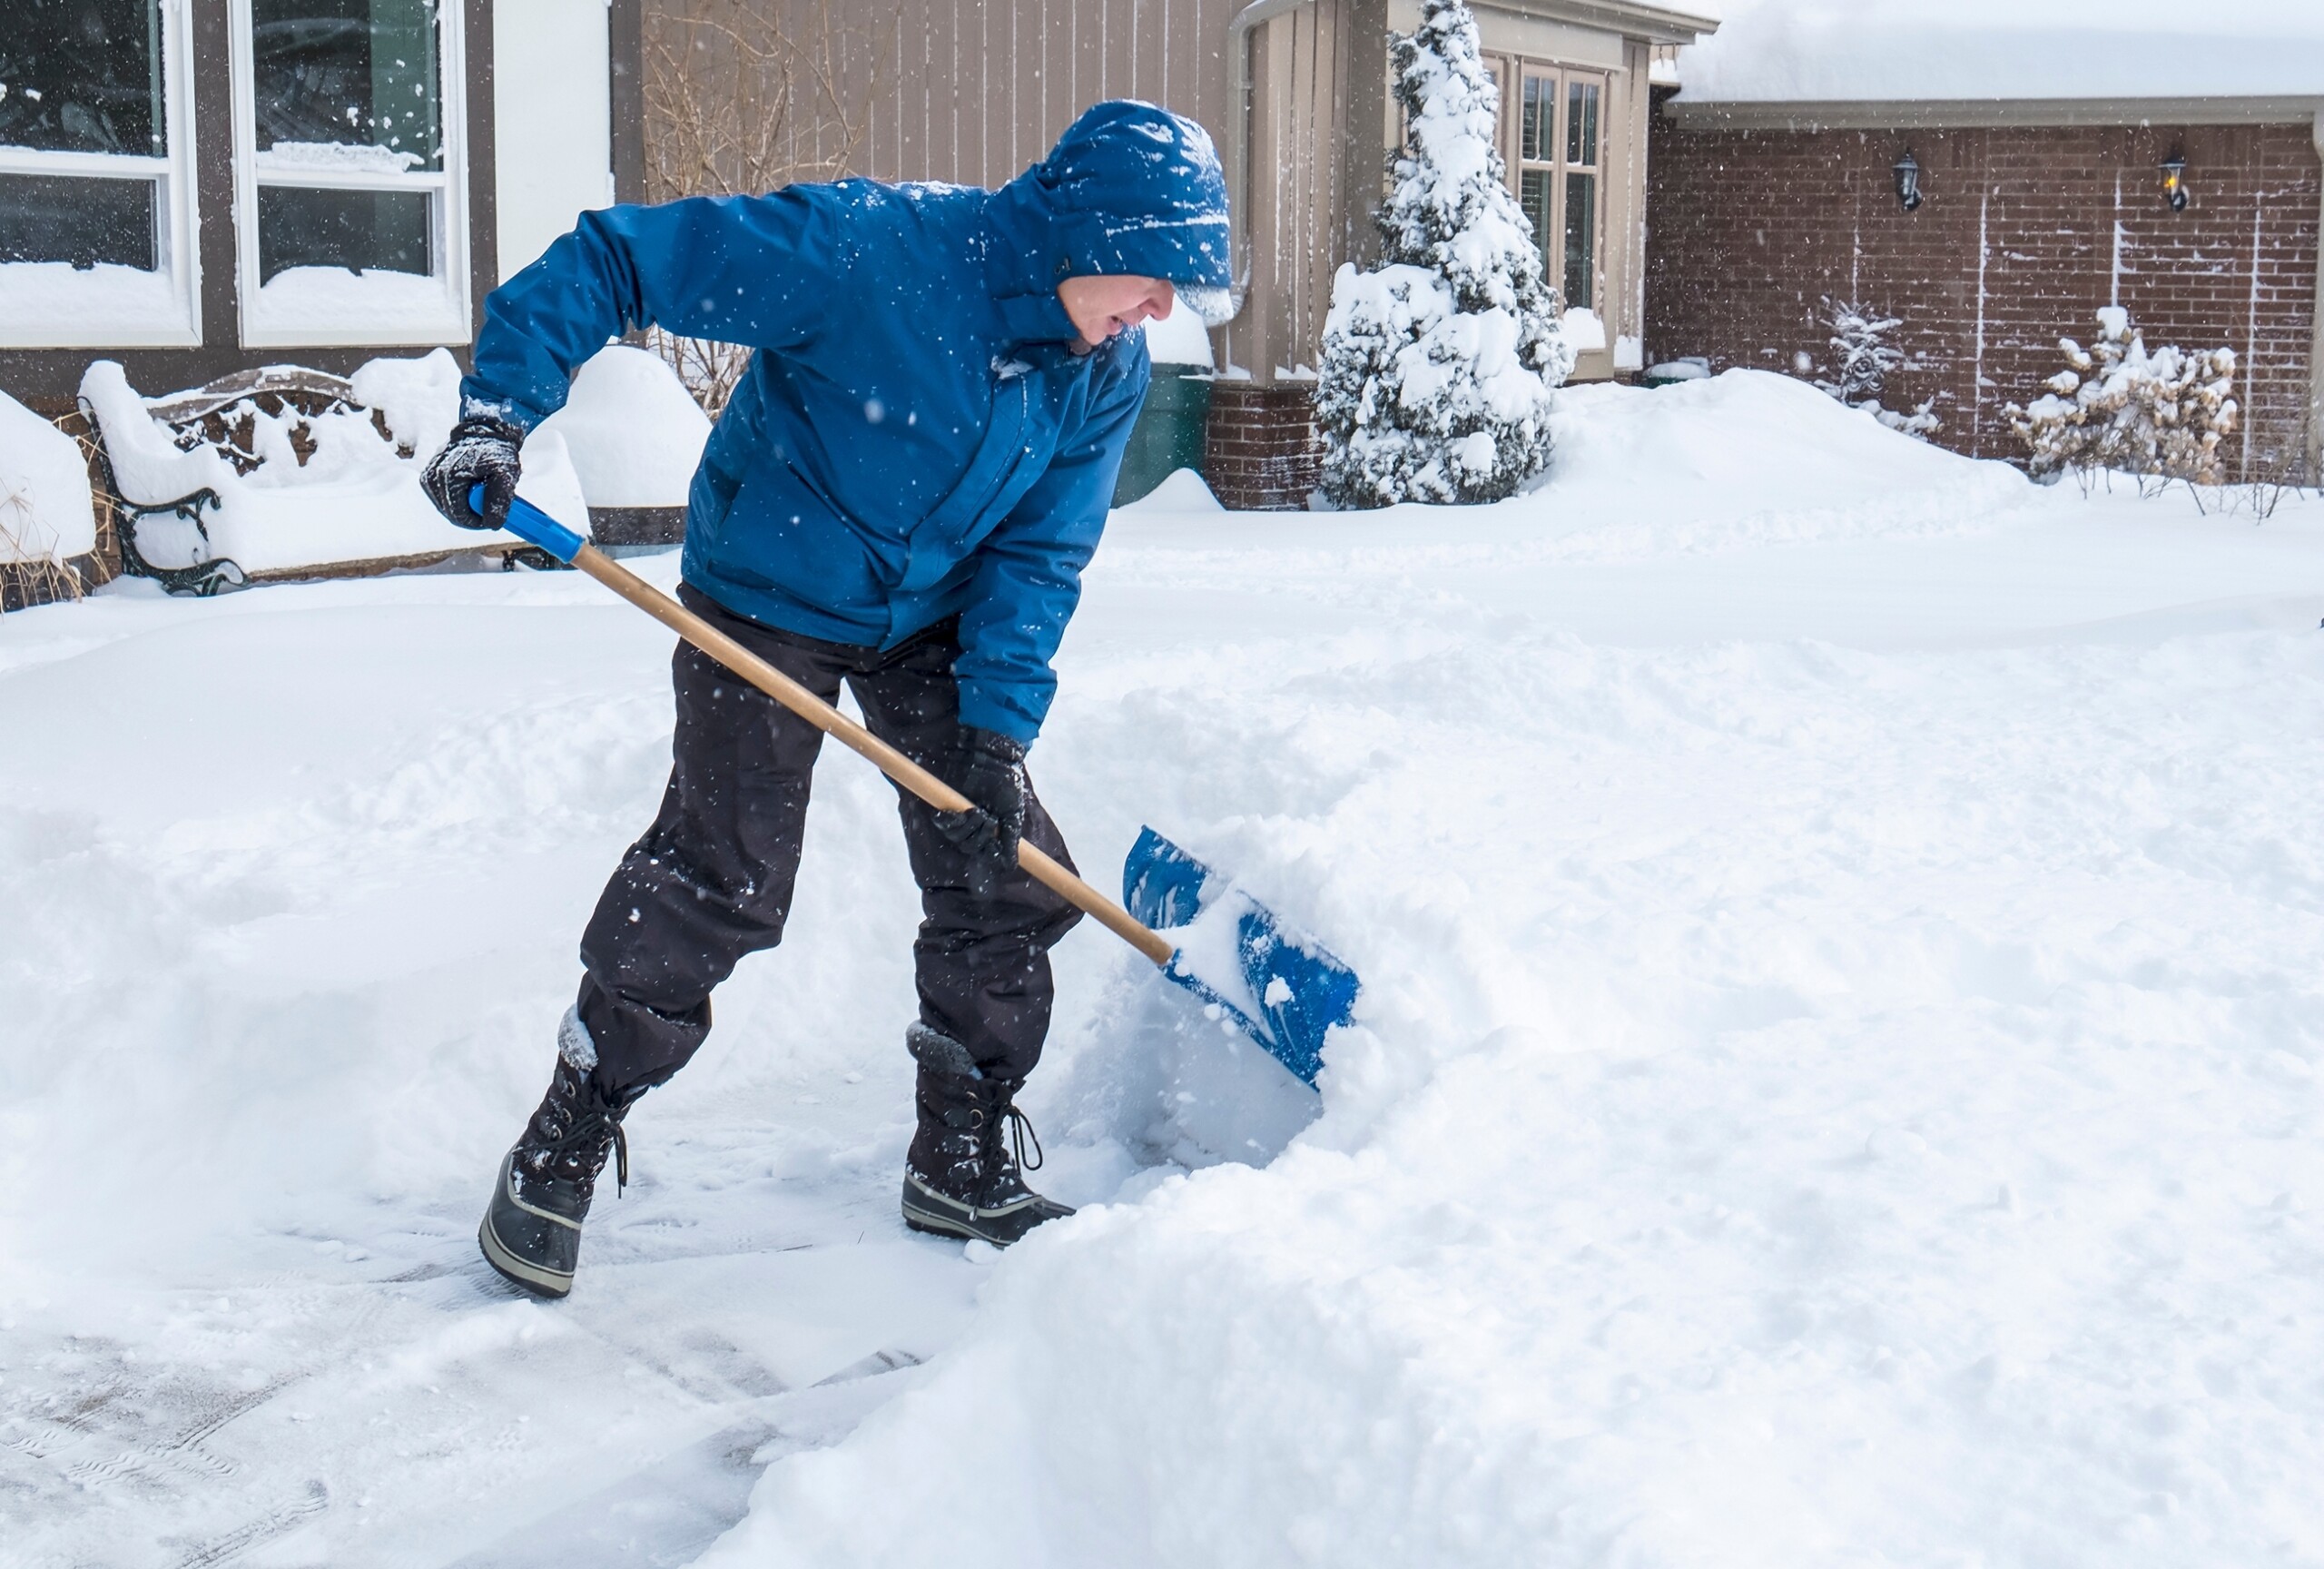 Can Winter Chores Replace an Exercise Regimen?